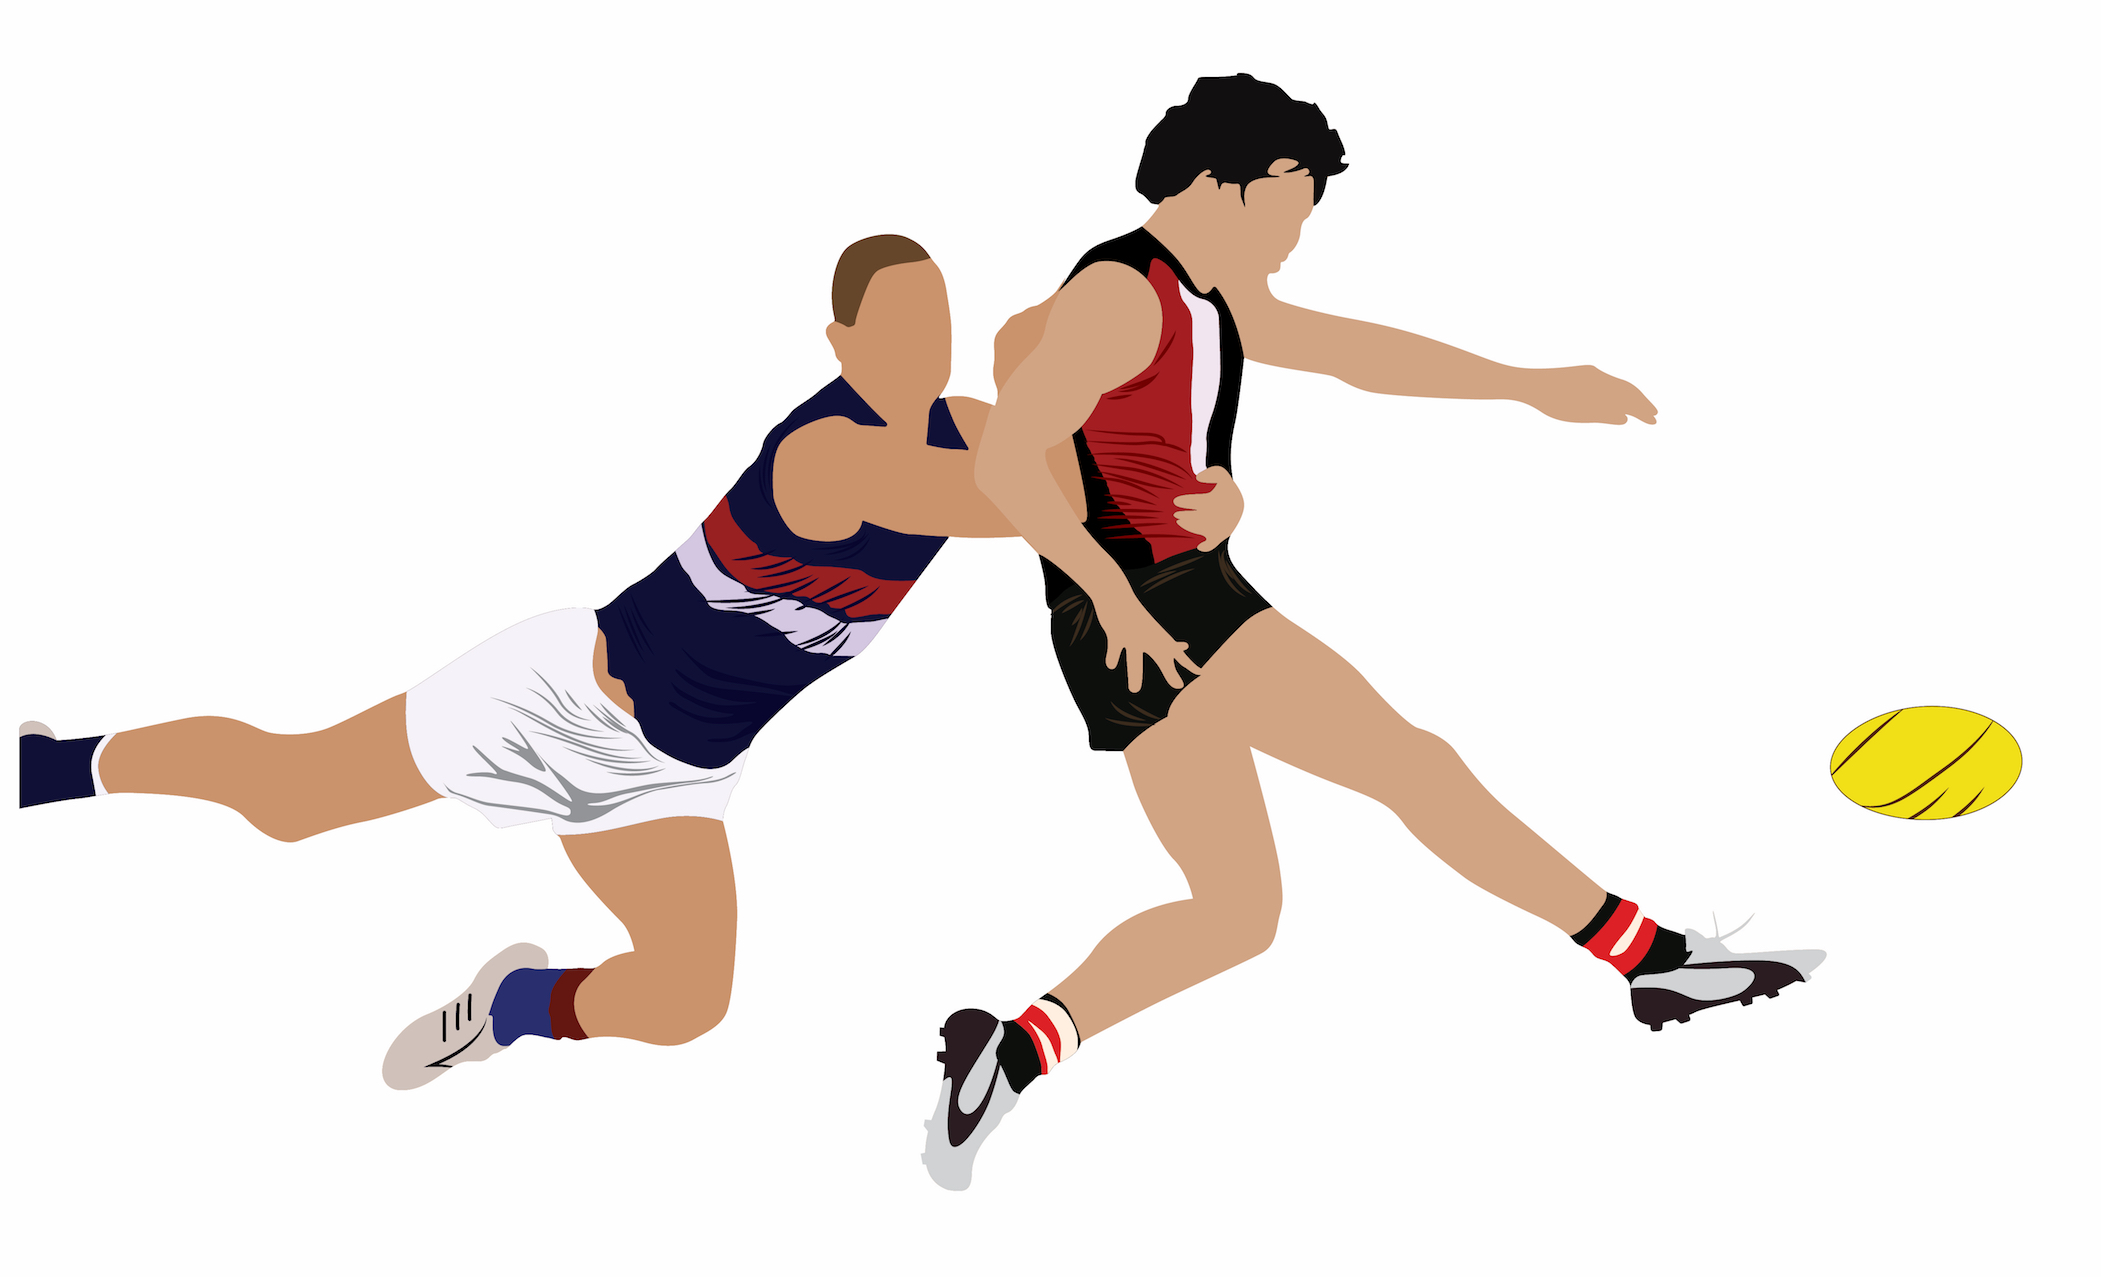 tackle in afl